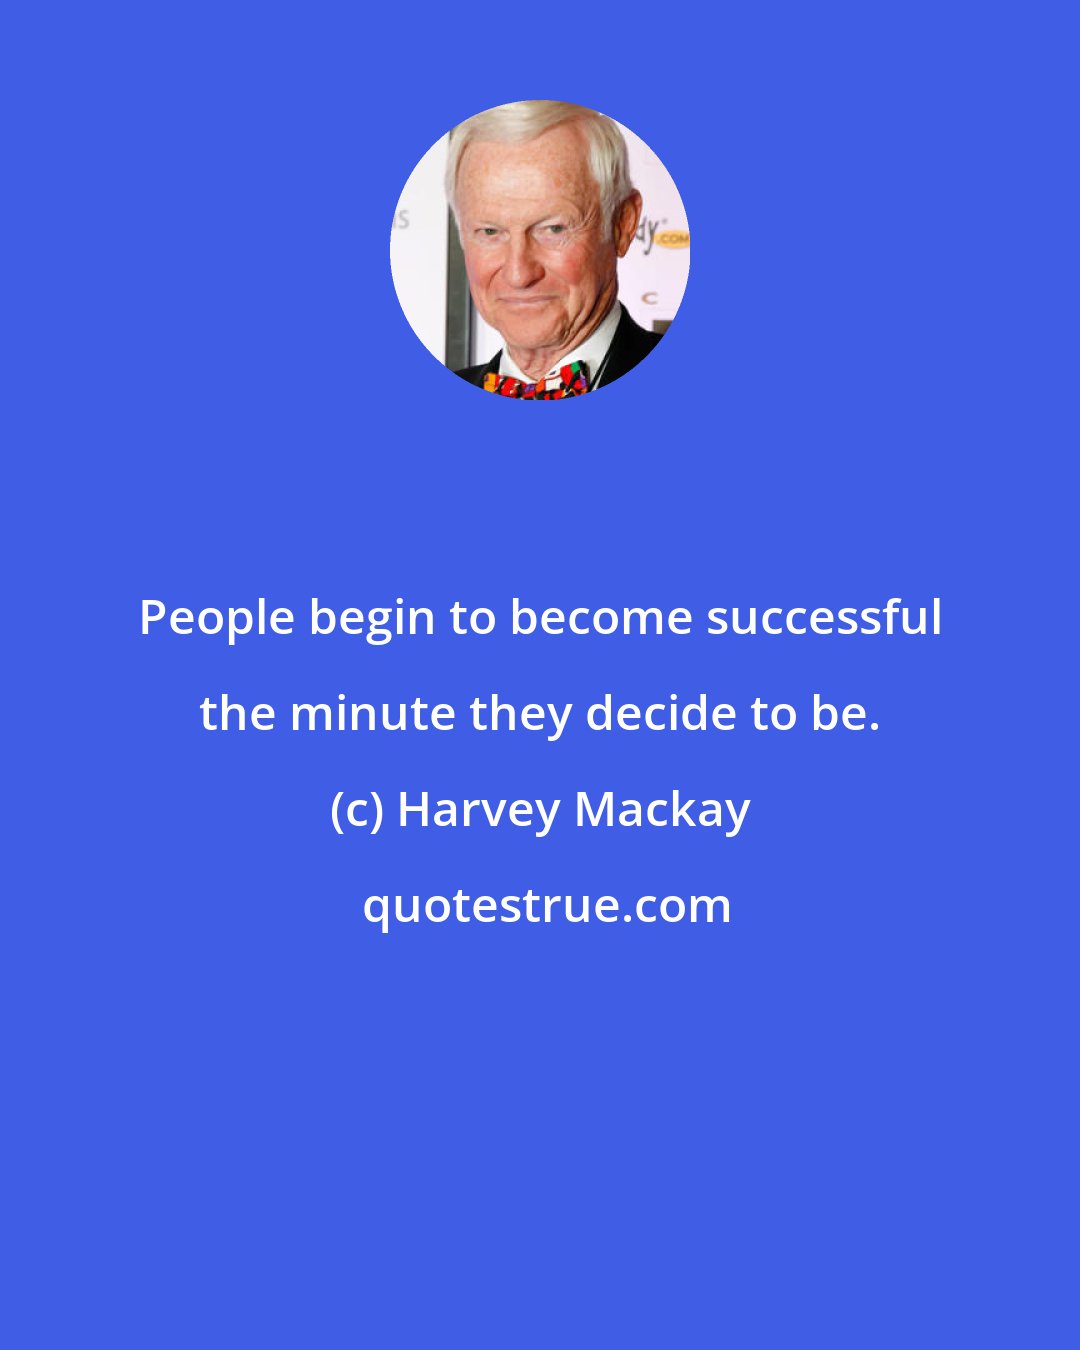 Harvey Mackay: People begin to become successful the minute they decide to be.